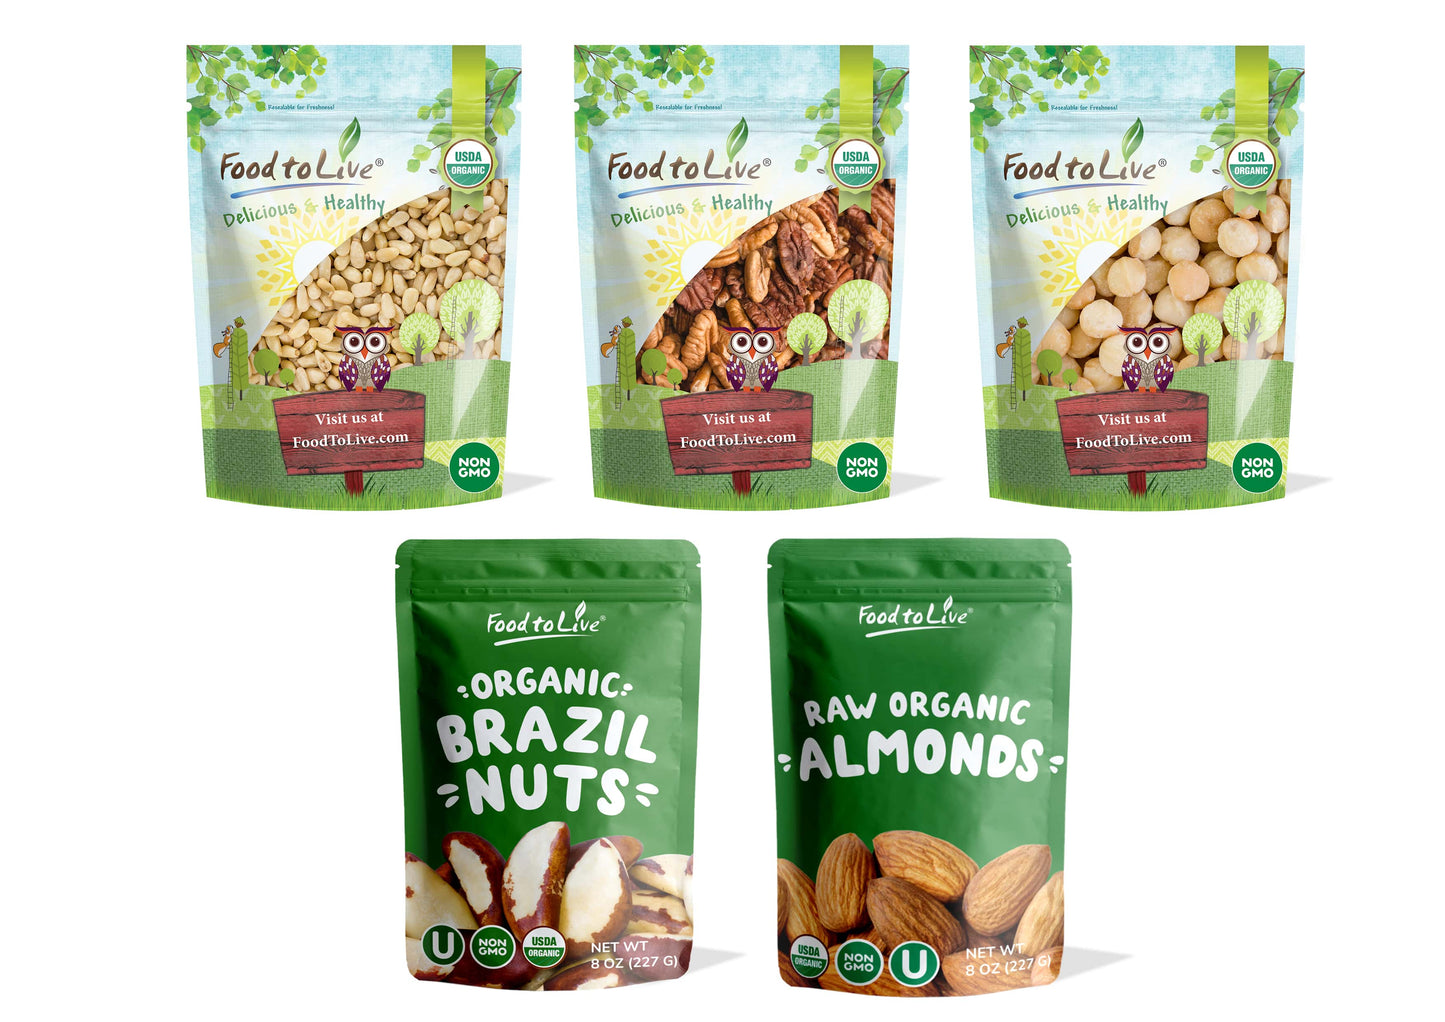 Organic Nutritious Nuts in a Gift Box - A Variety Pack of Pecans, Brazil Nuts, Macadamia Nuts, Pine Nuts and Almonds - by Food to Live